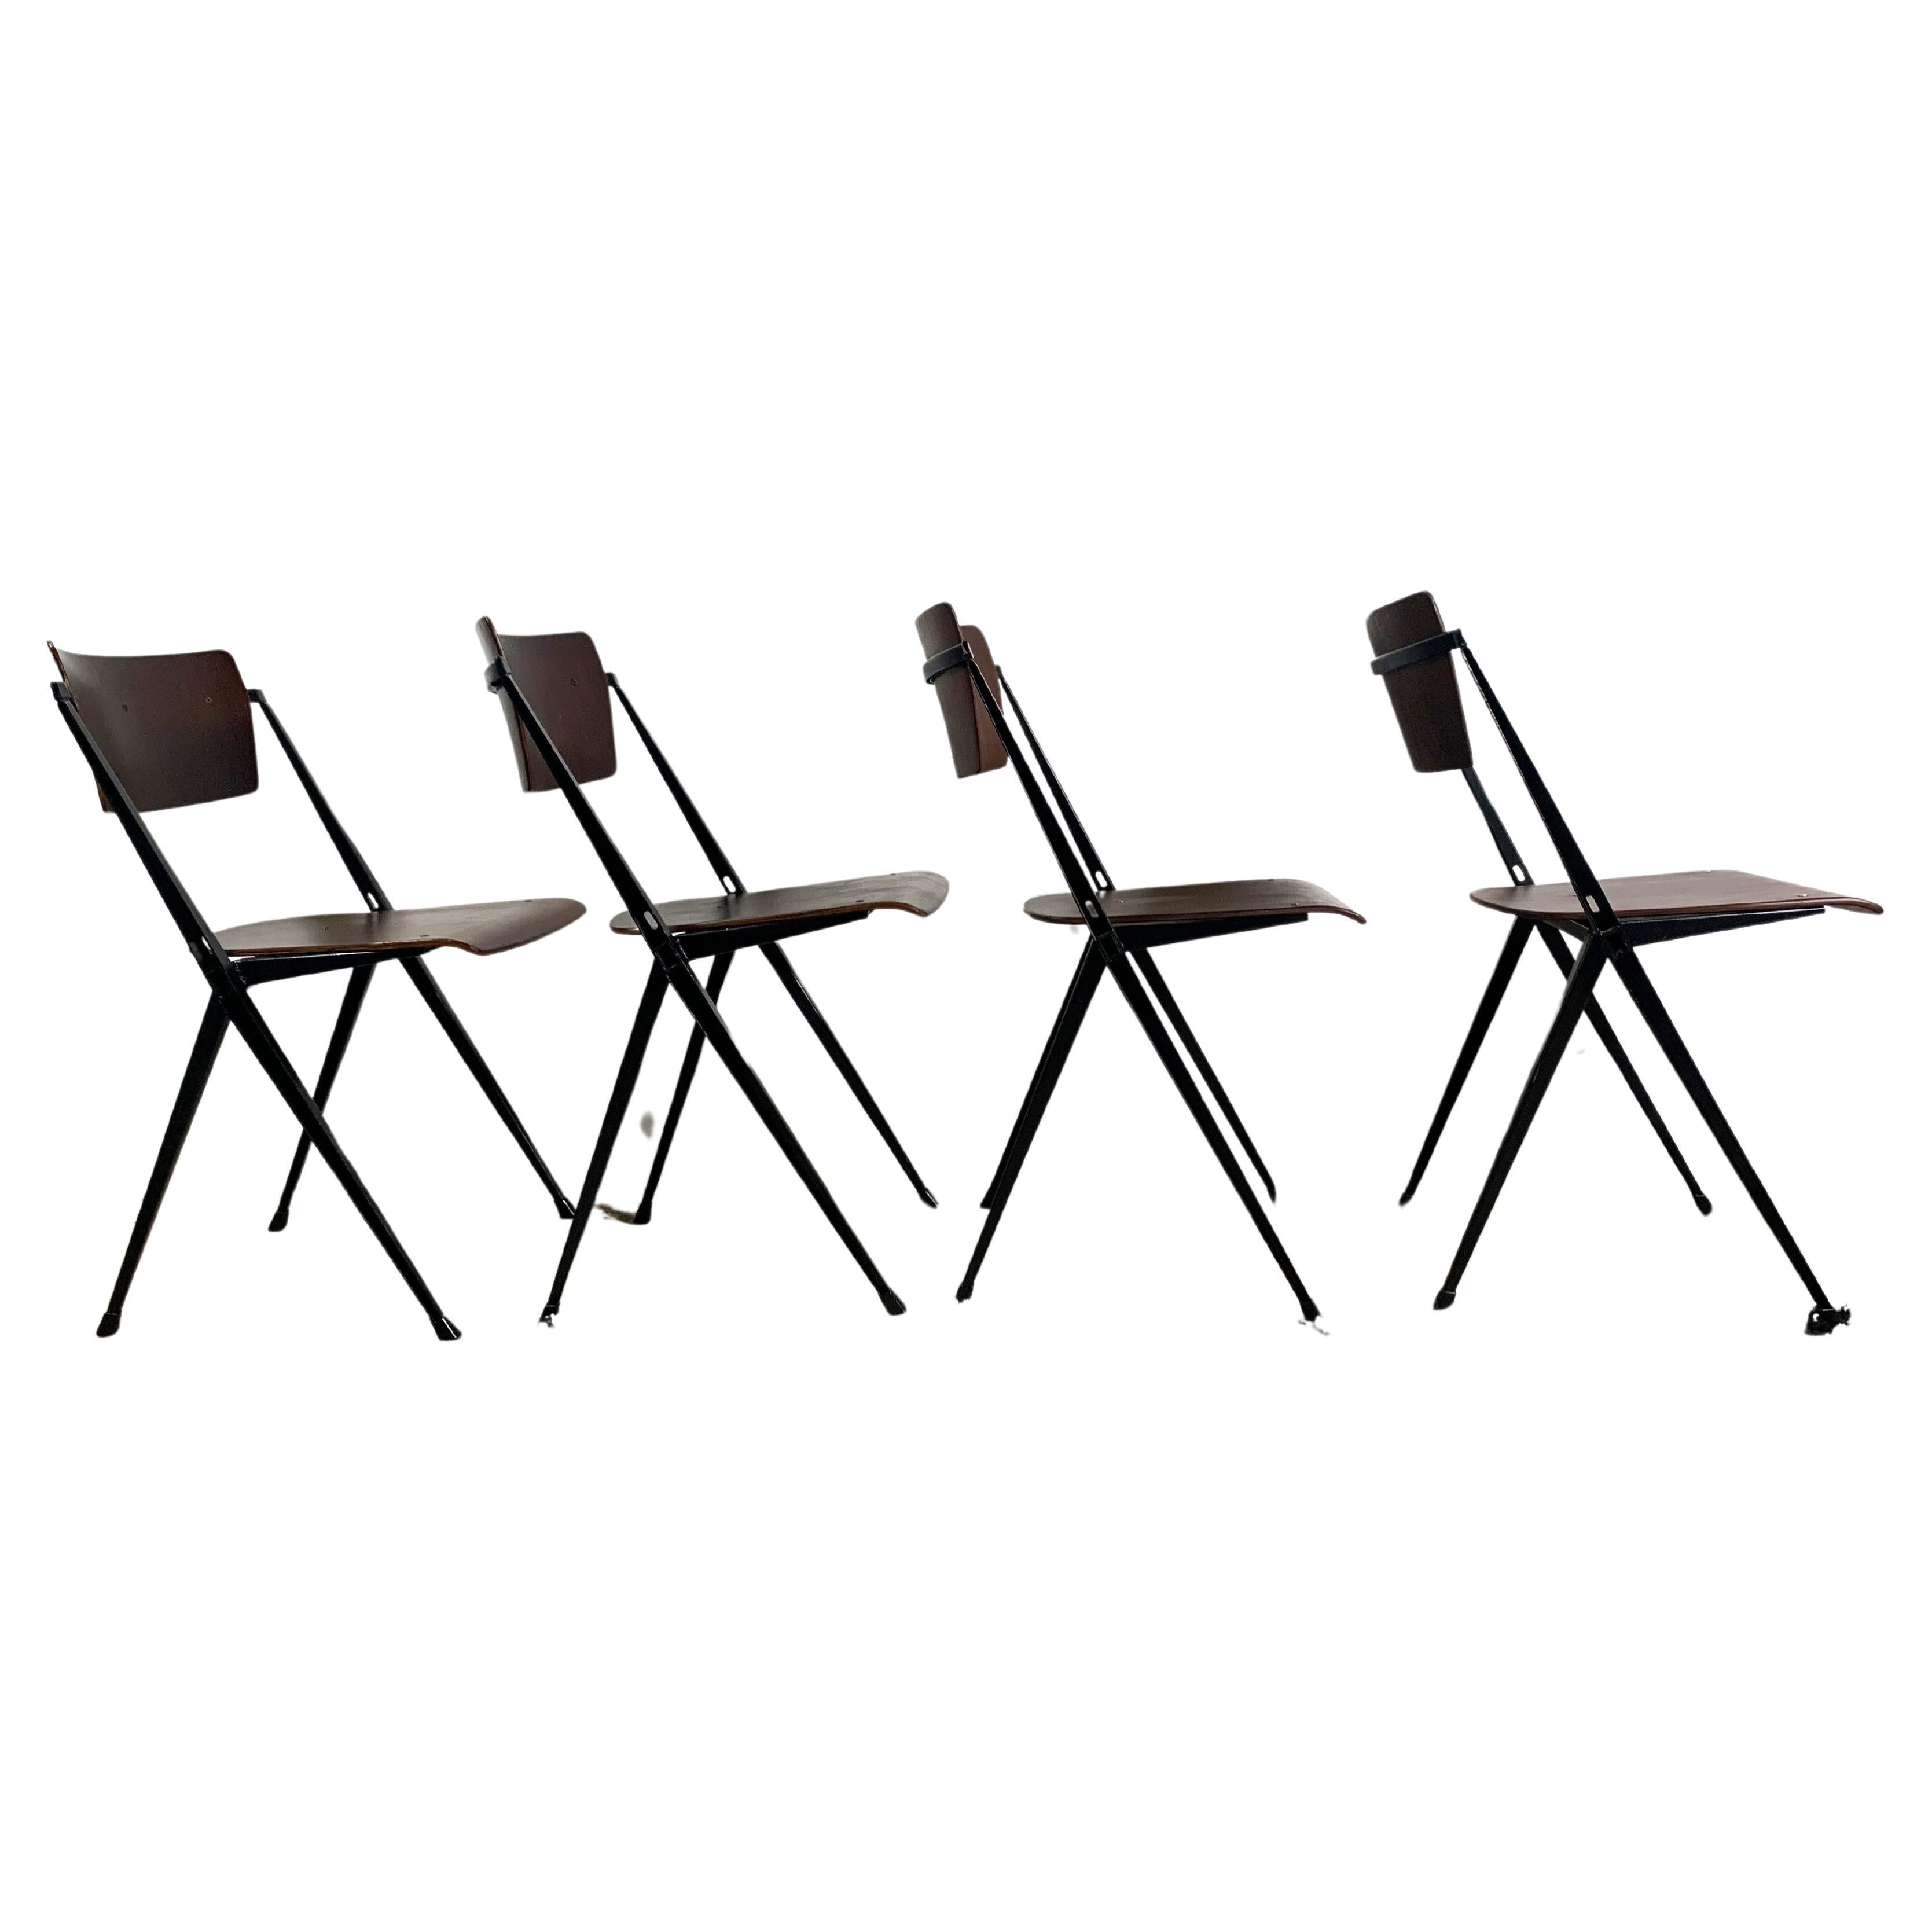 Pyramide Chairs By Wim Rietveld Set Of 4, Industrial Mid Century